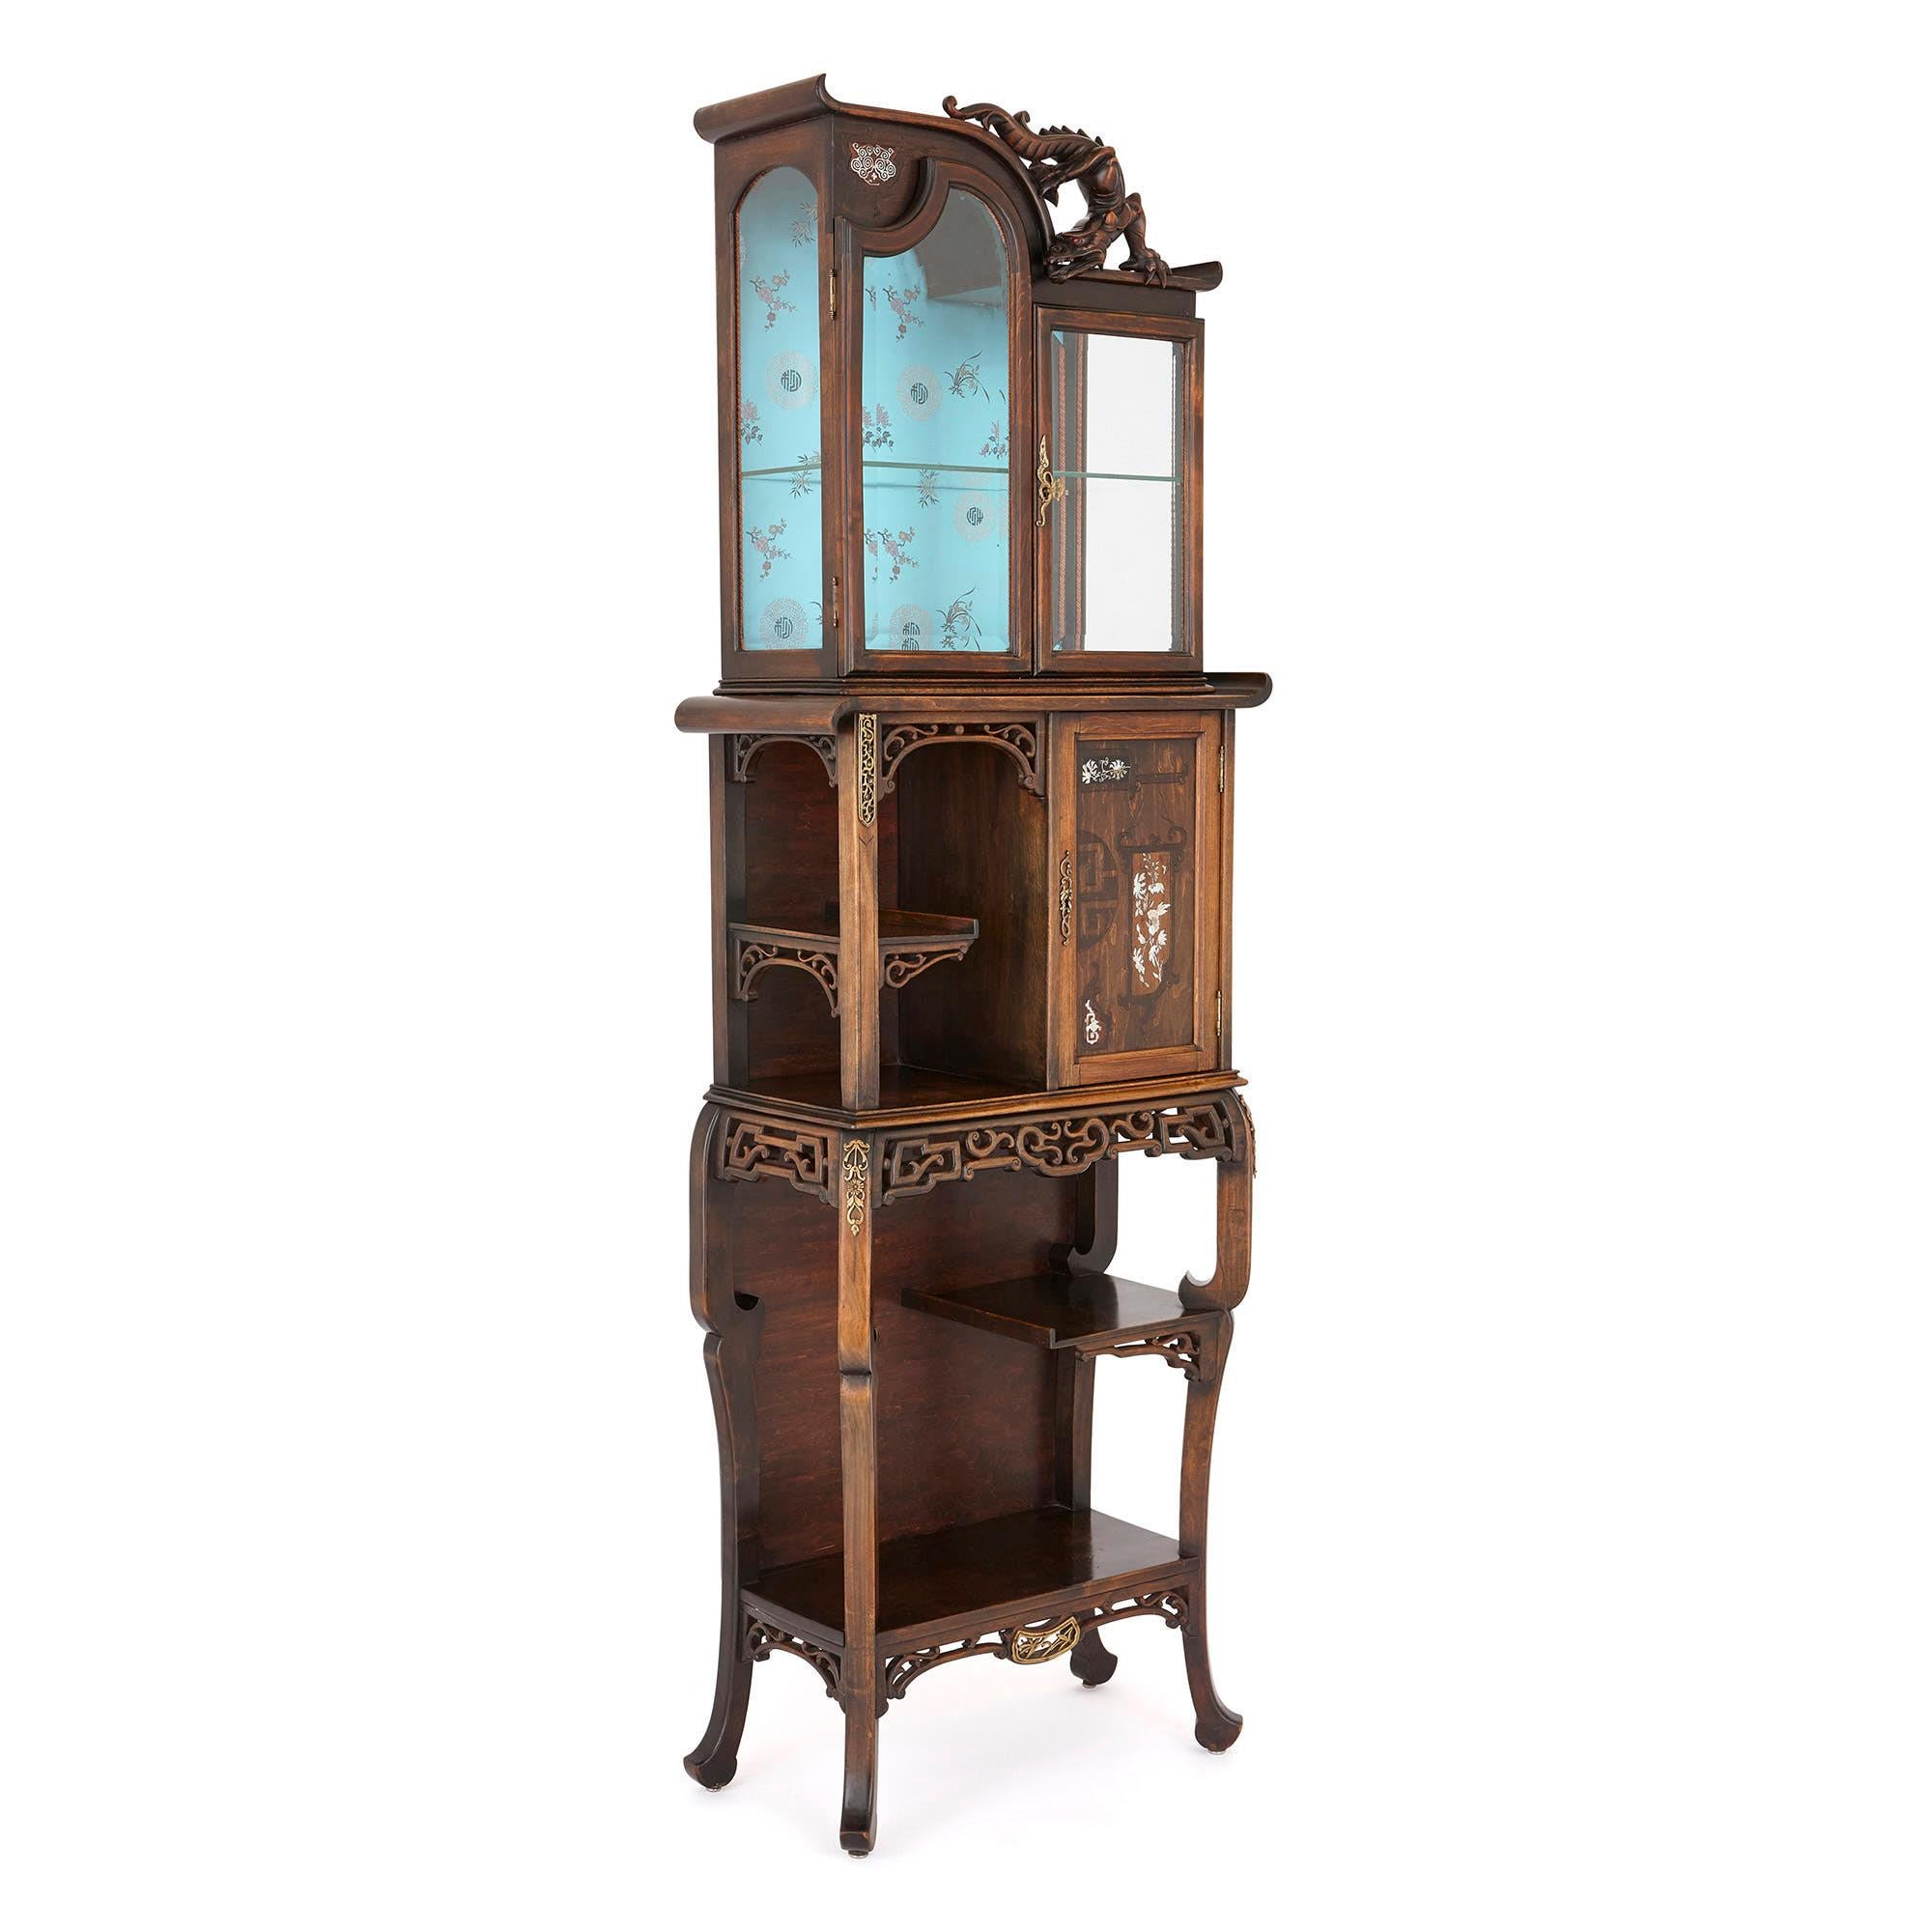 This wonderful display cabinet is designed in a ‘Japonisme’ (Japanese) style, which was popular in Europe in the mid-late 19th century. This craze was kick-started by Japan reopening to trade with the West, and exporting Japanese goods—including